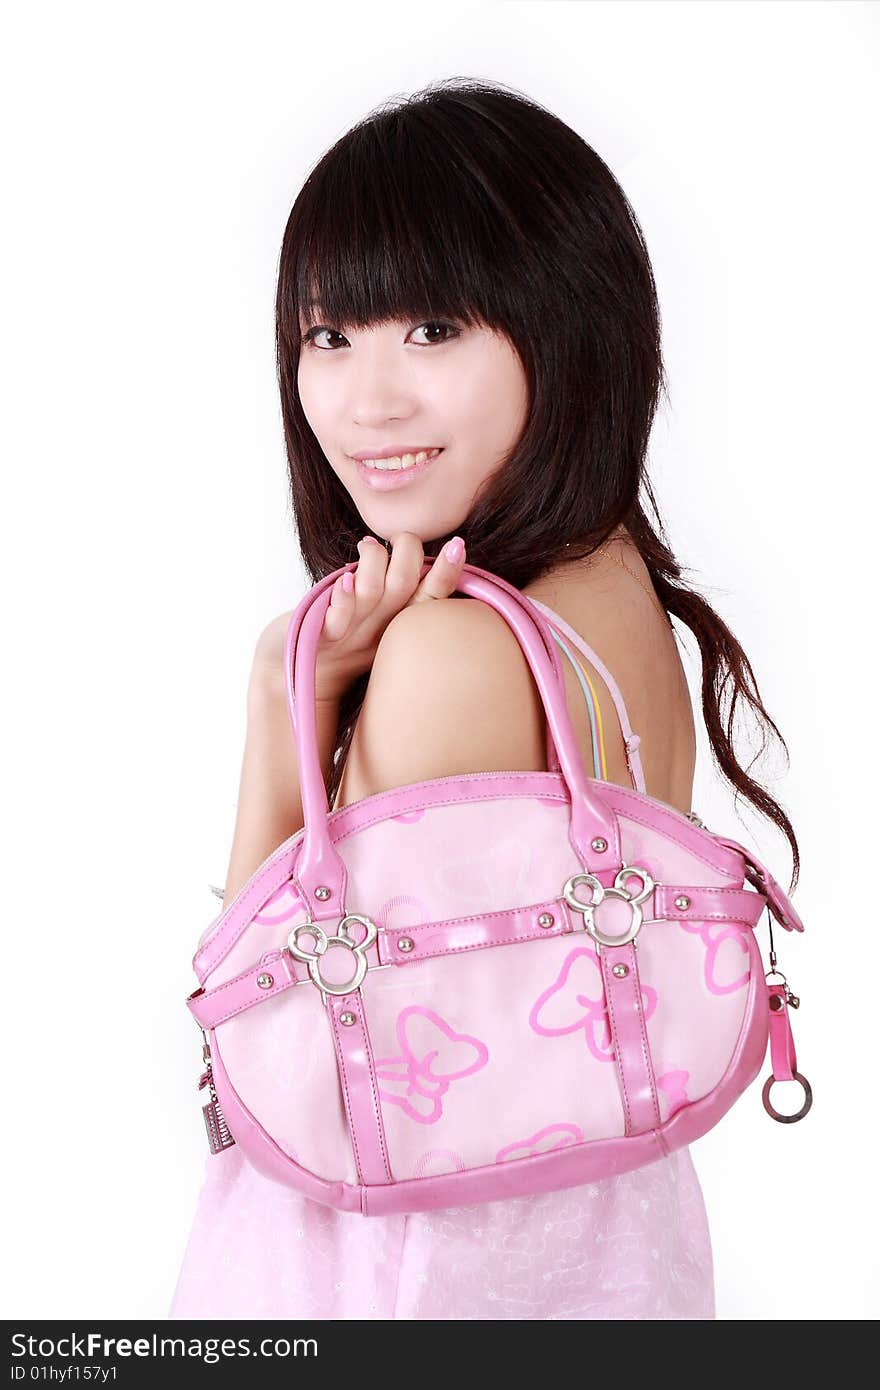 A beautiful Asian girl with pink handbag on white background.